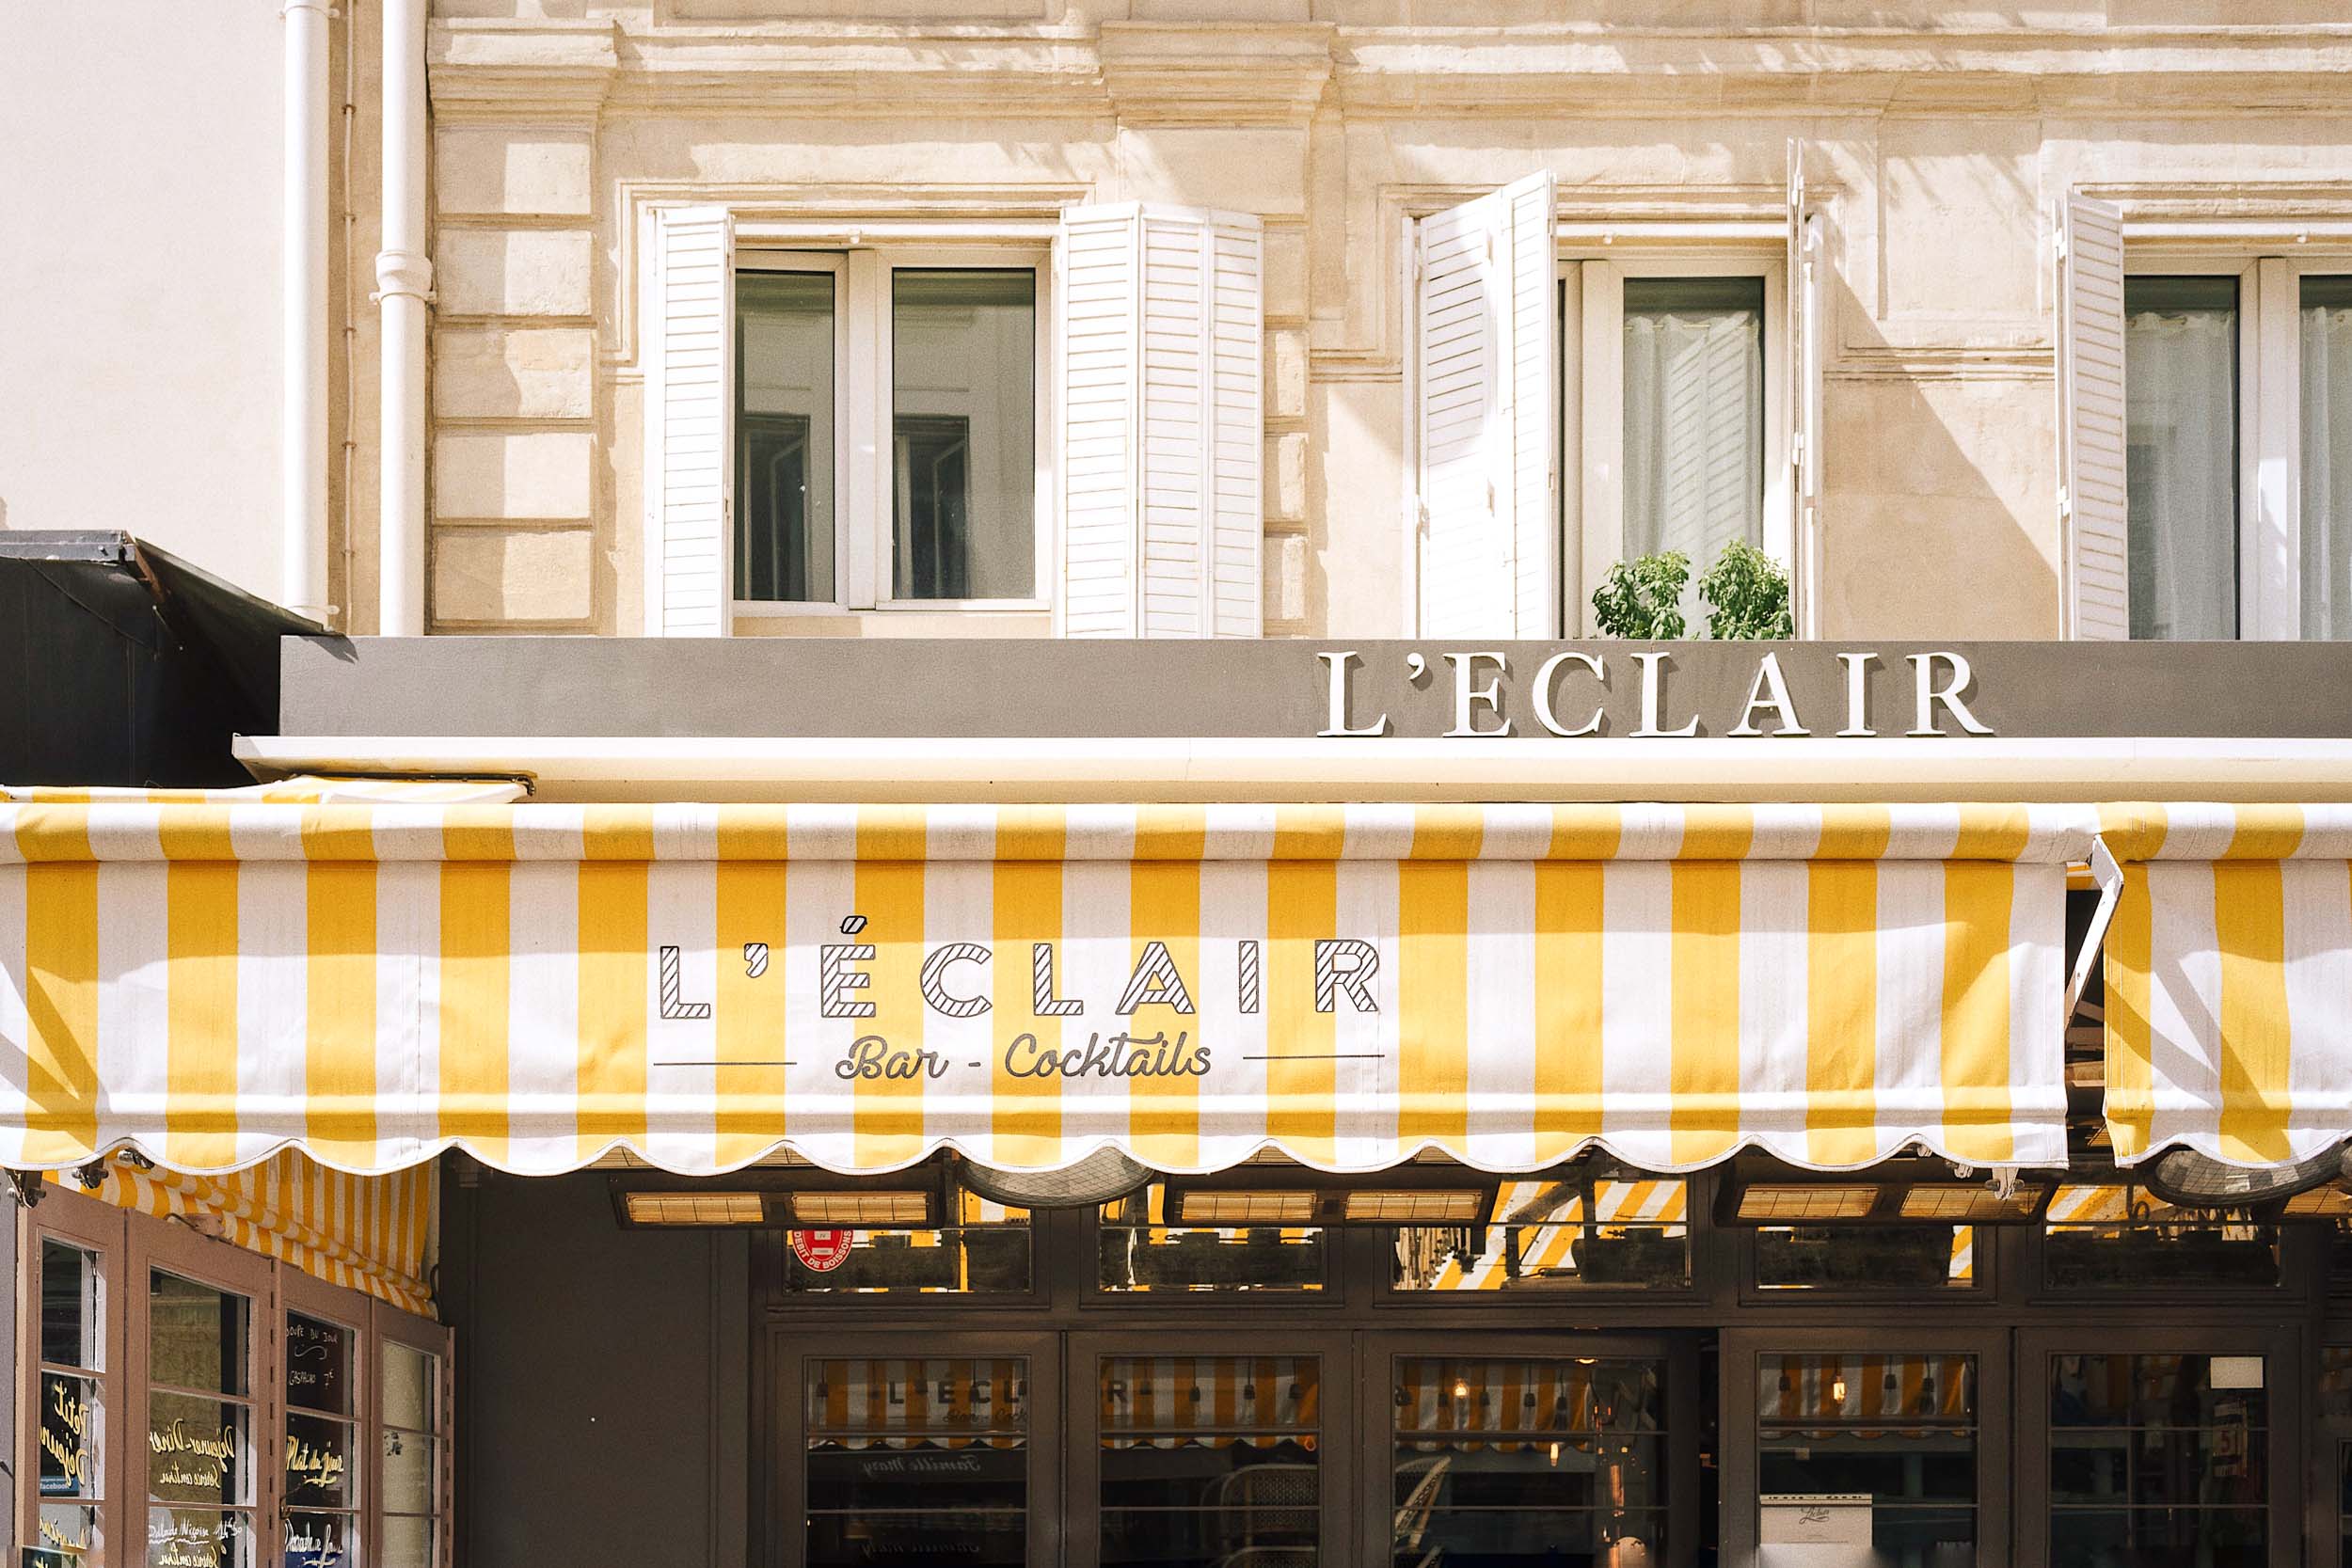 Paris walking tours: take yourself on a self-guided tour to L'Eclair bar on famous Rue Cler